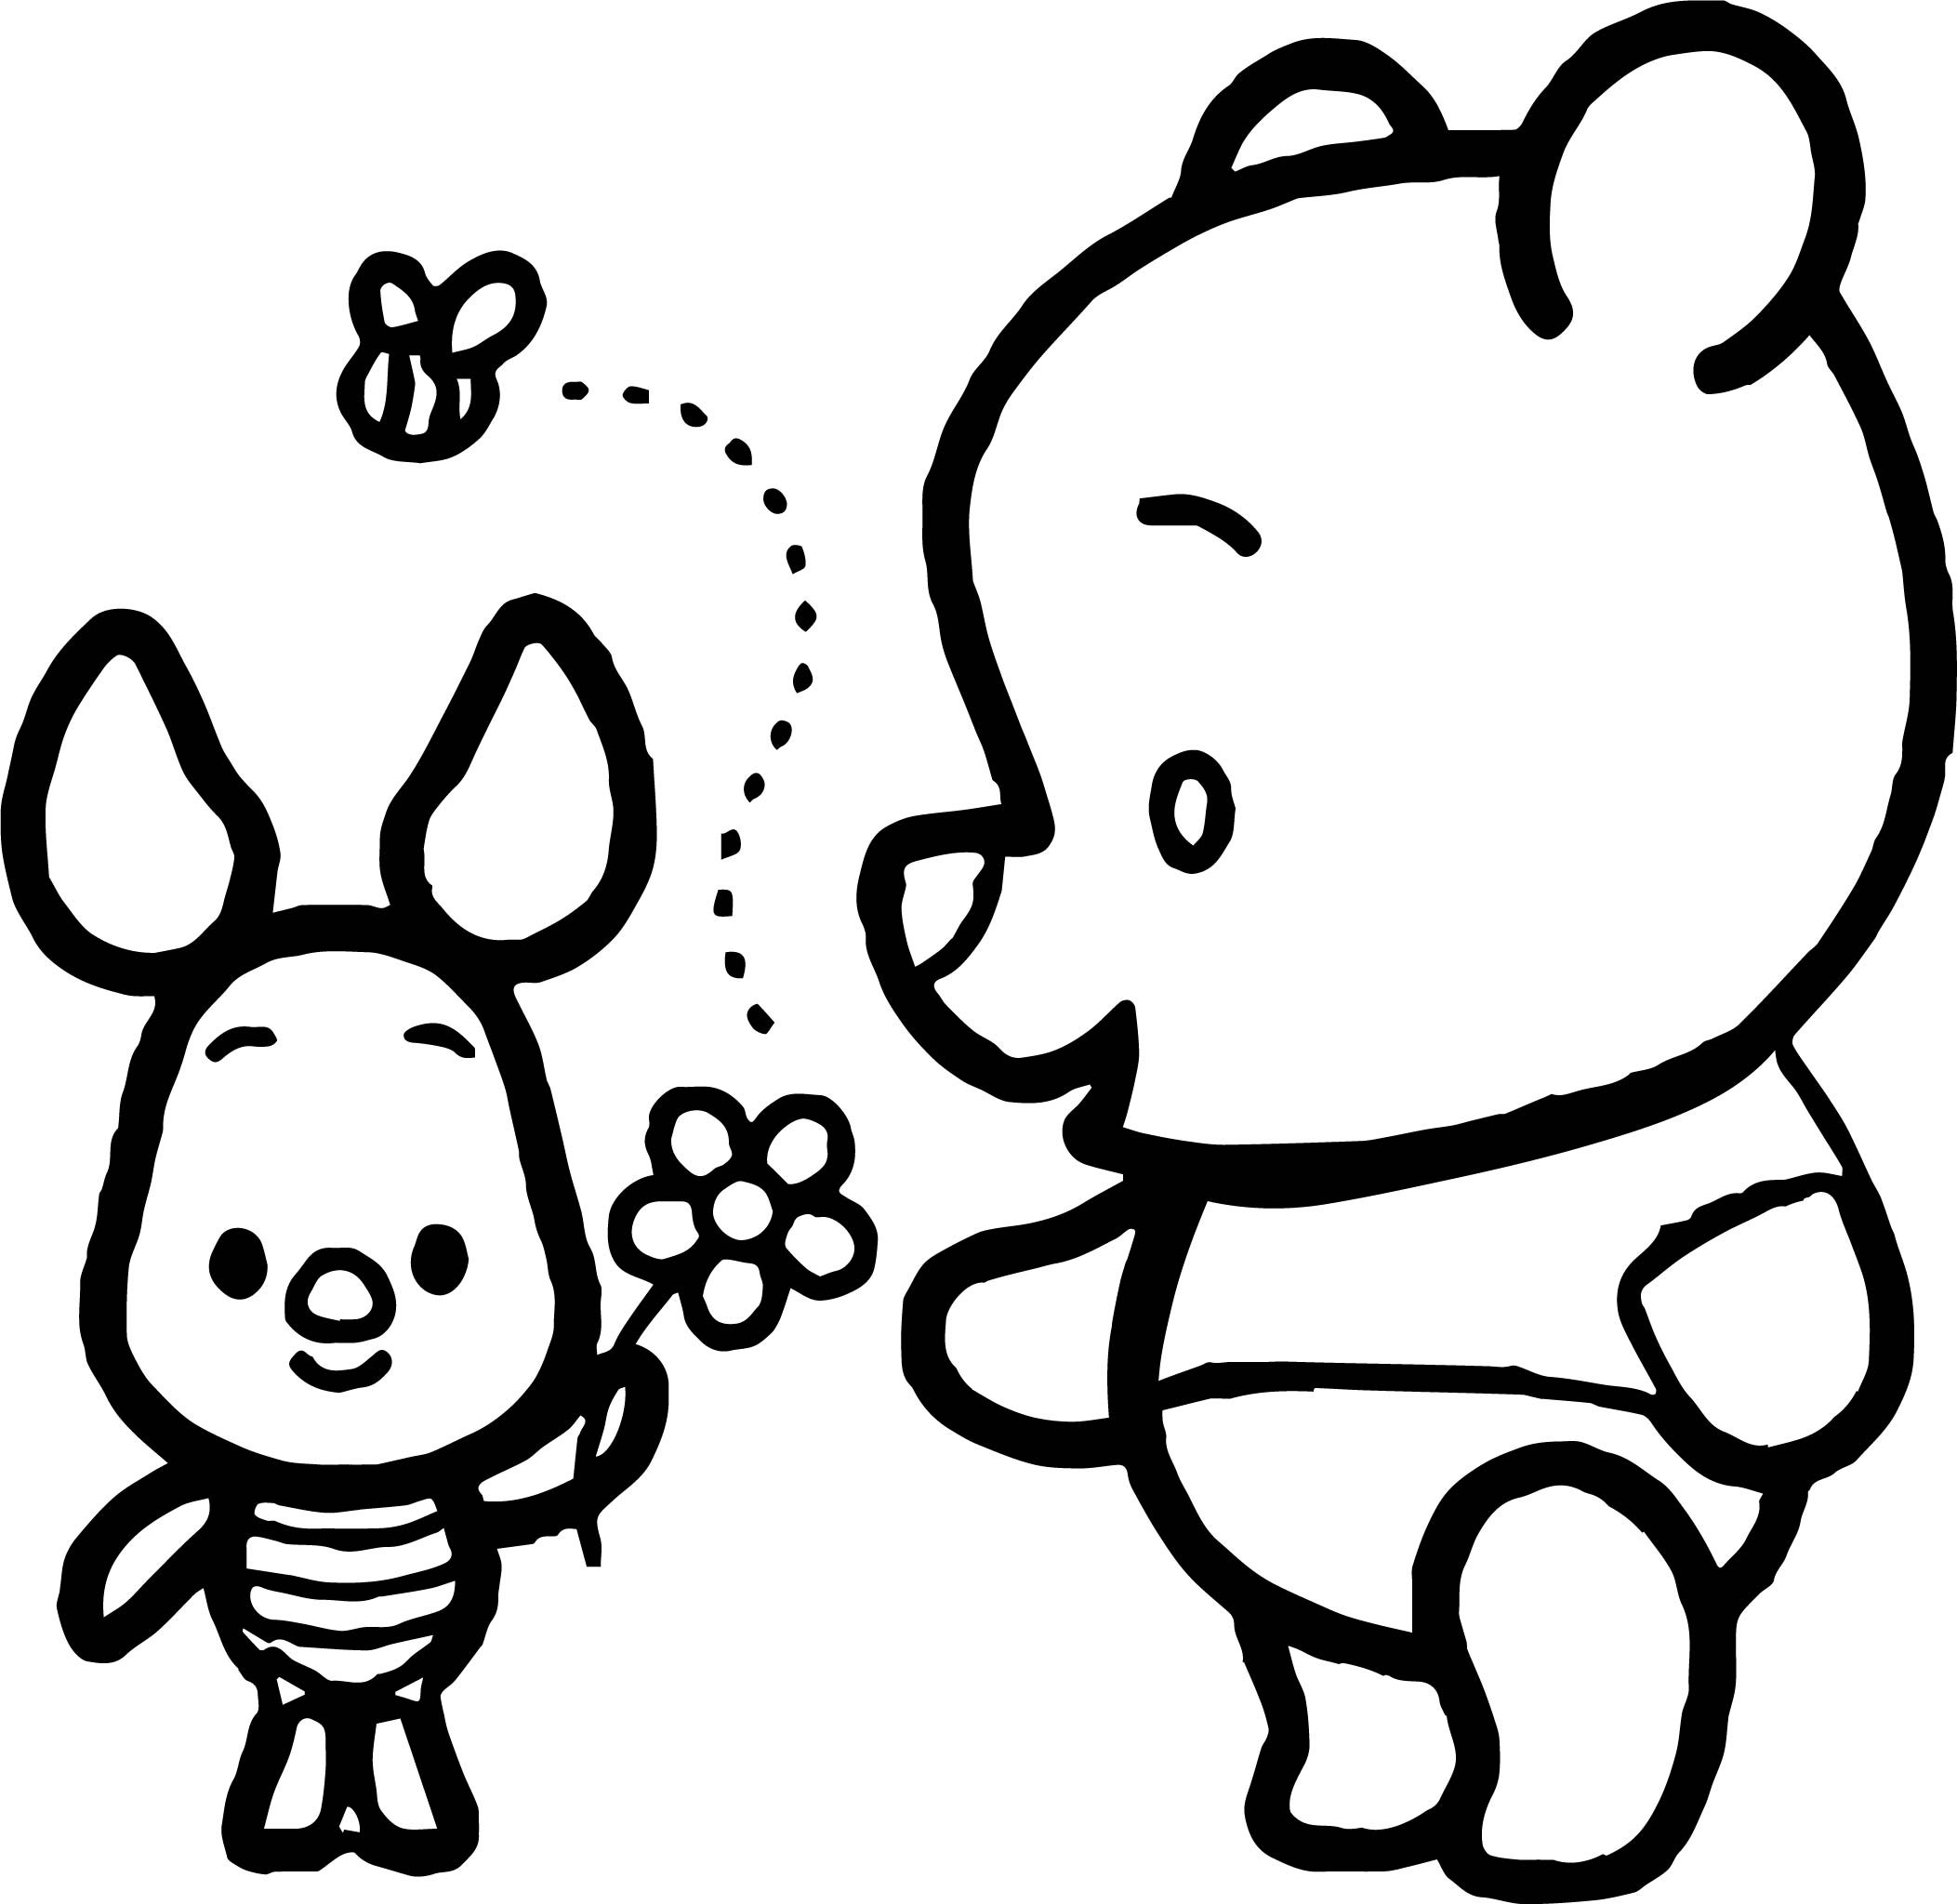 Cute Baby Pig Coloring Pages
 Baby Pig Pooh Chibi Coloring Page